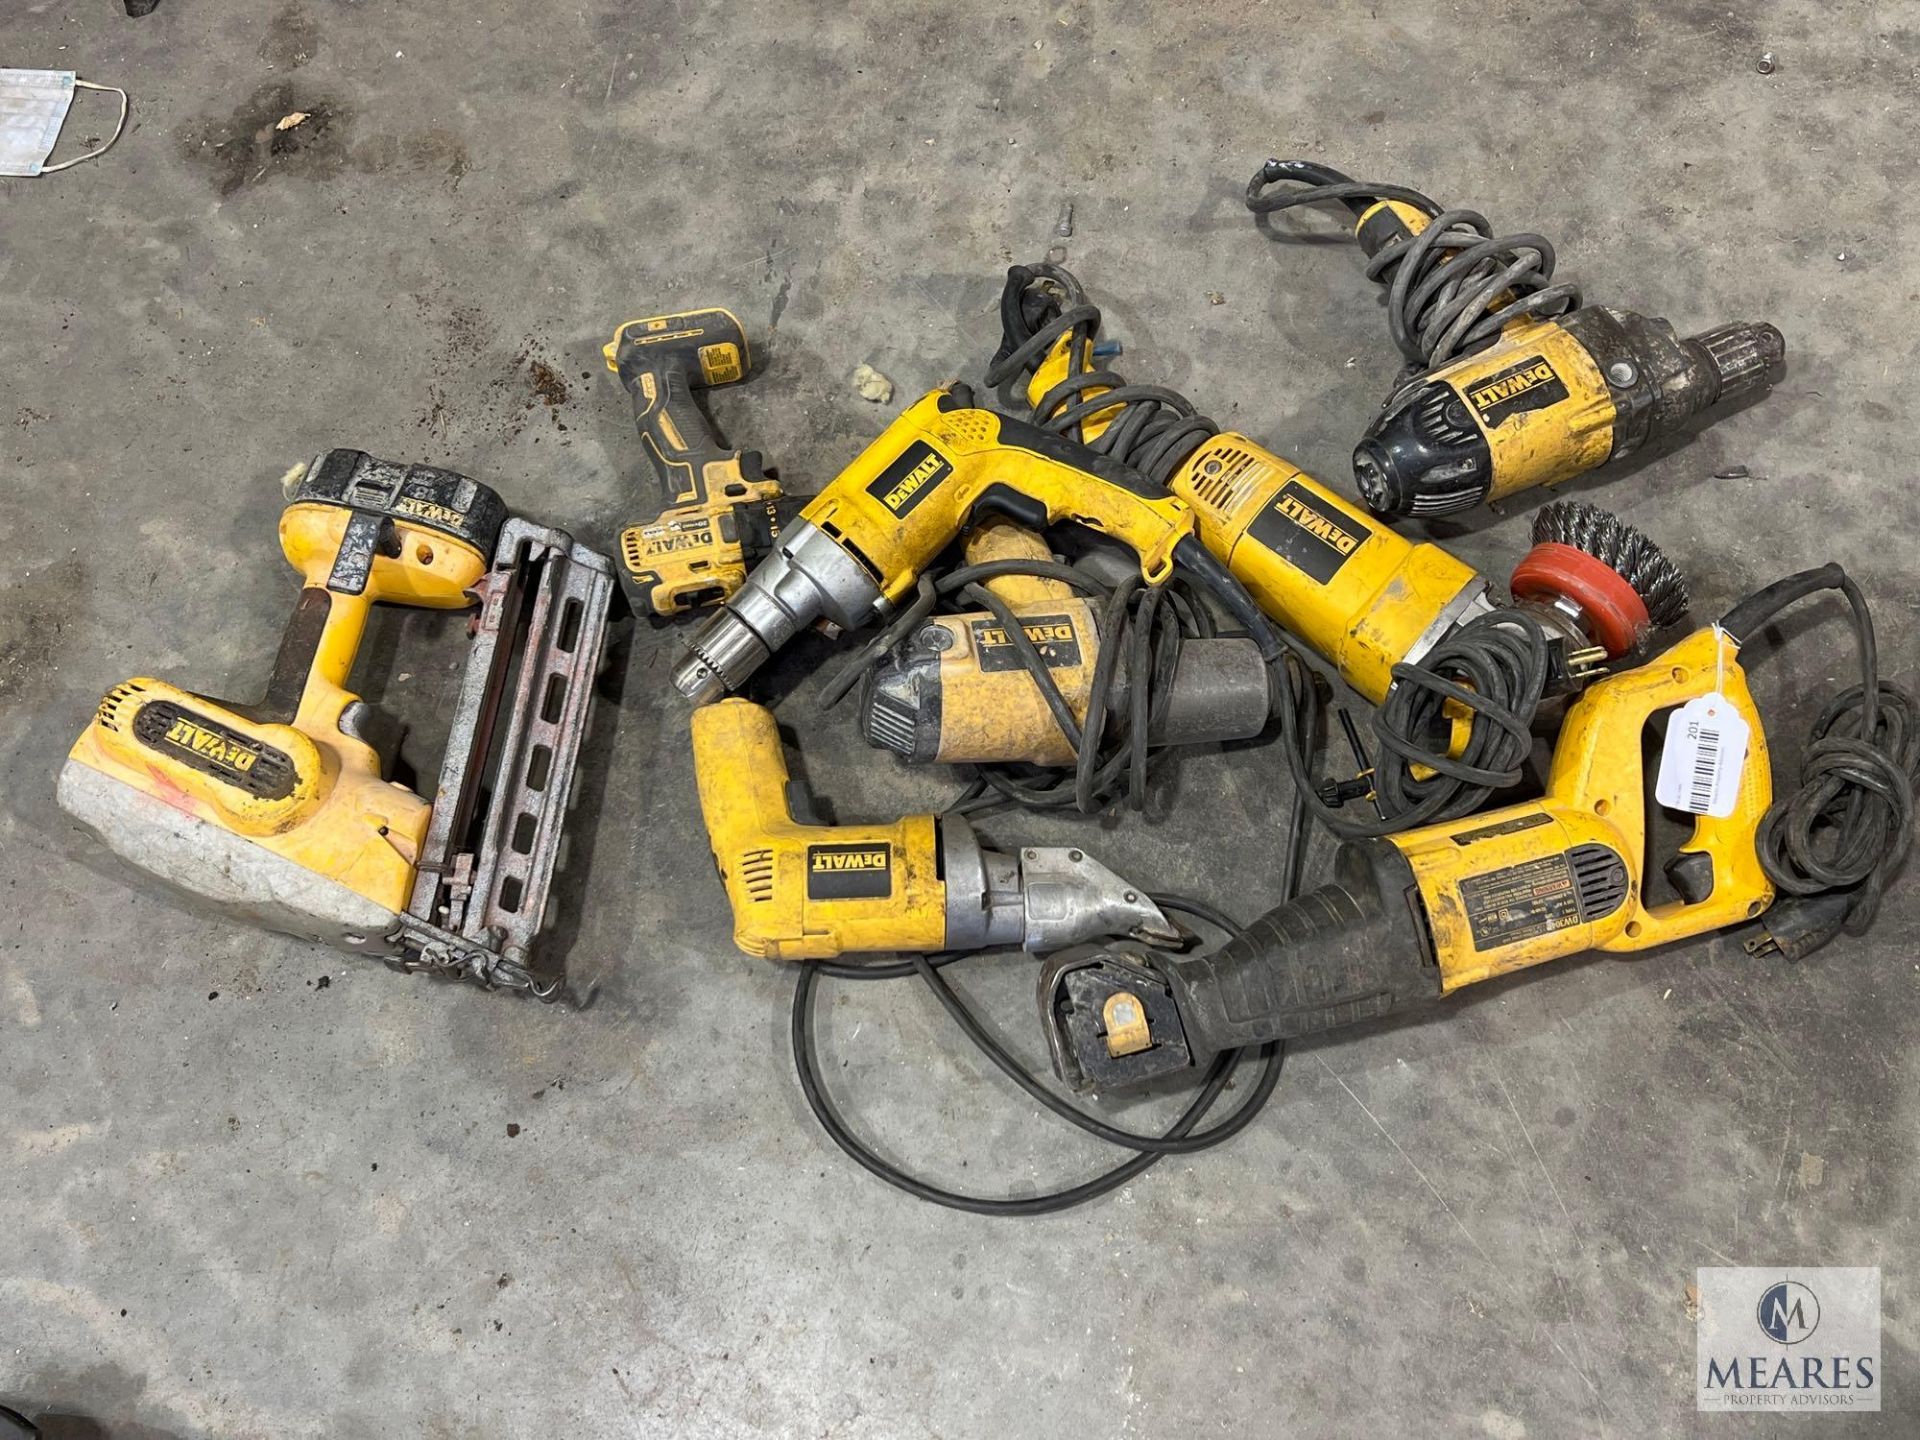 Large DeWalt Corded and Cordless Tool Lot